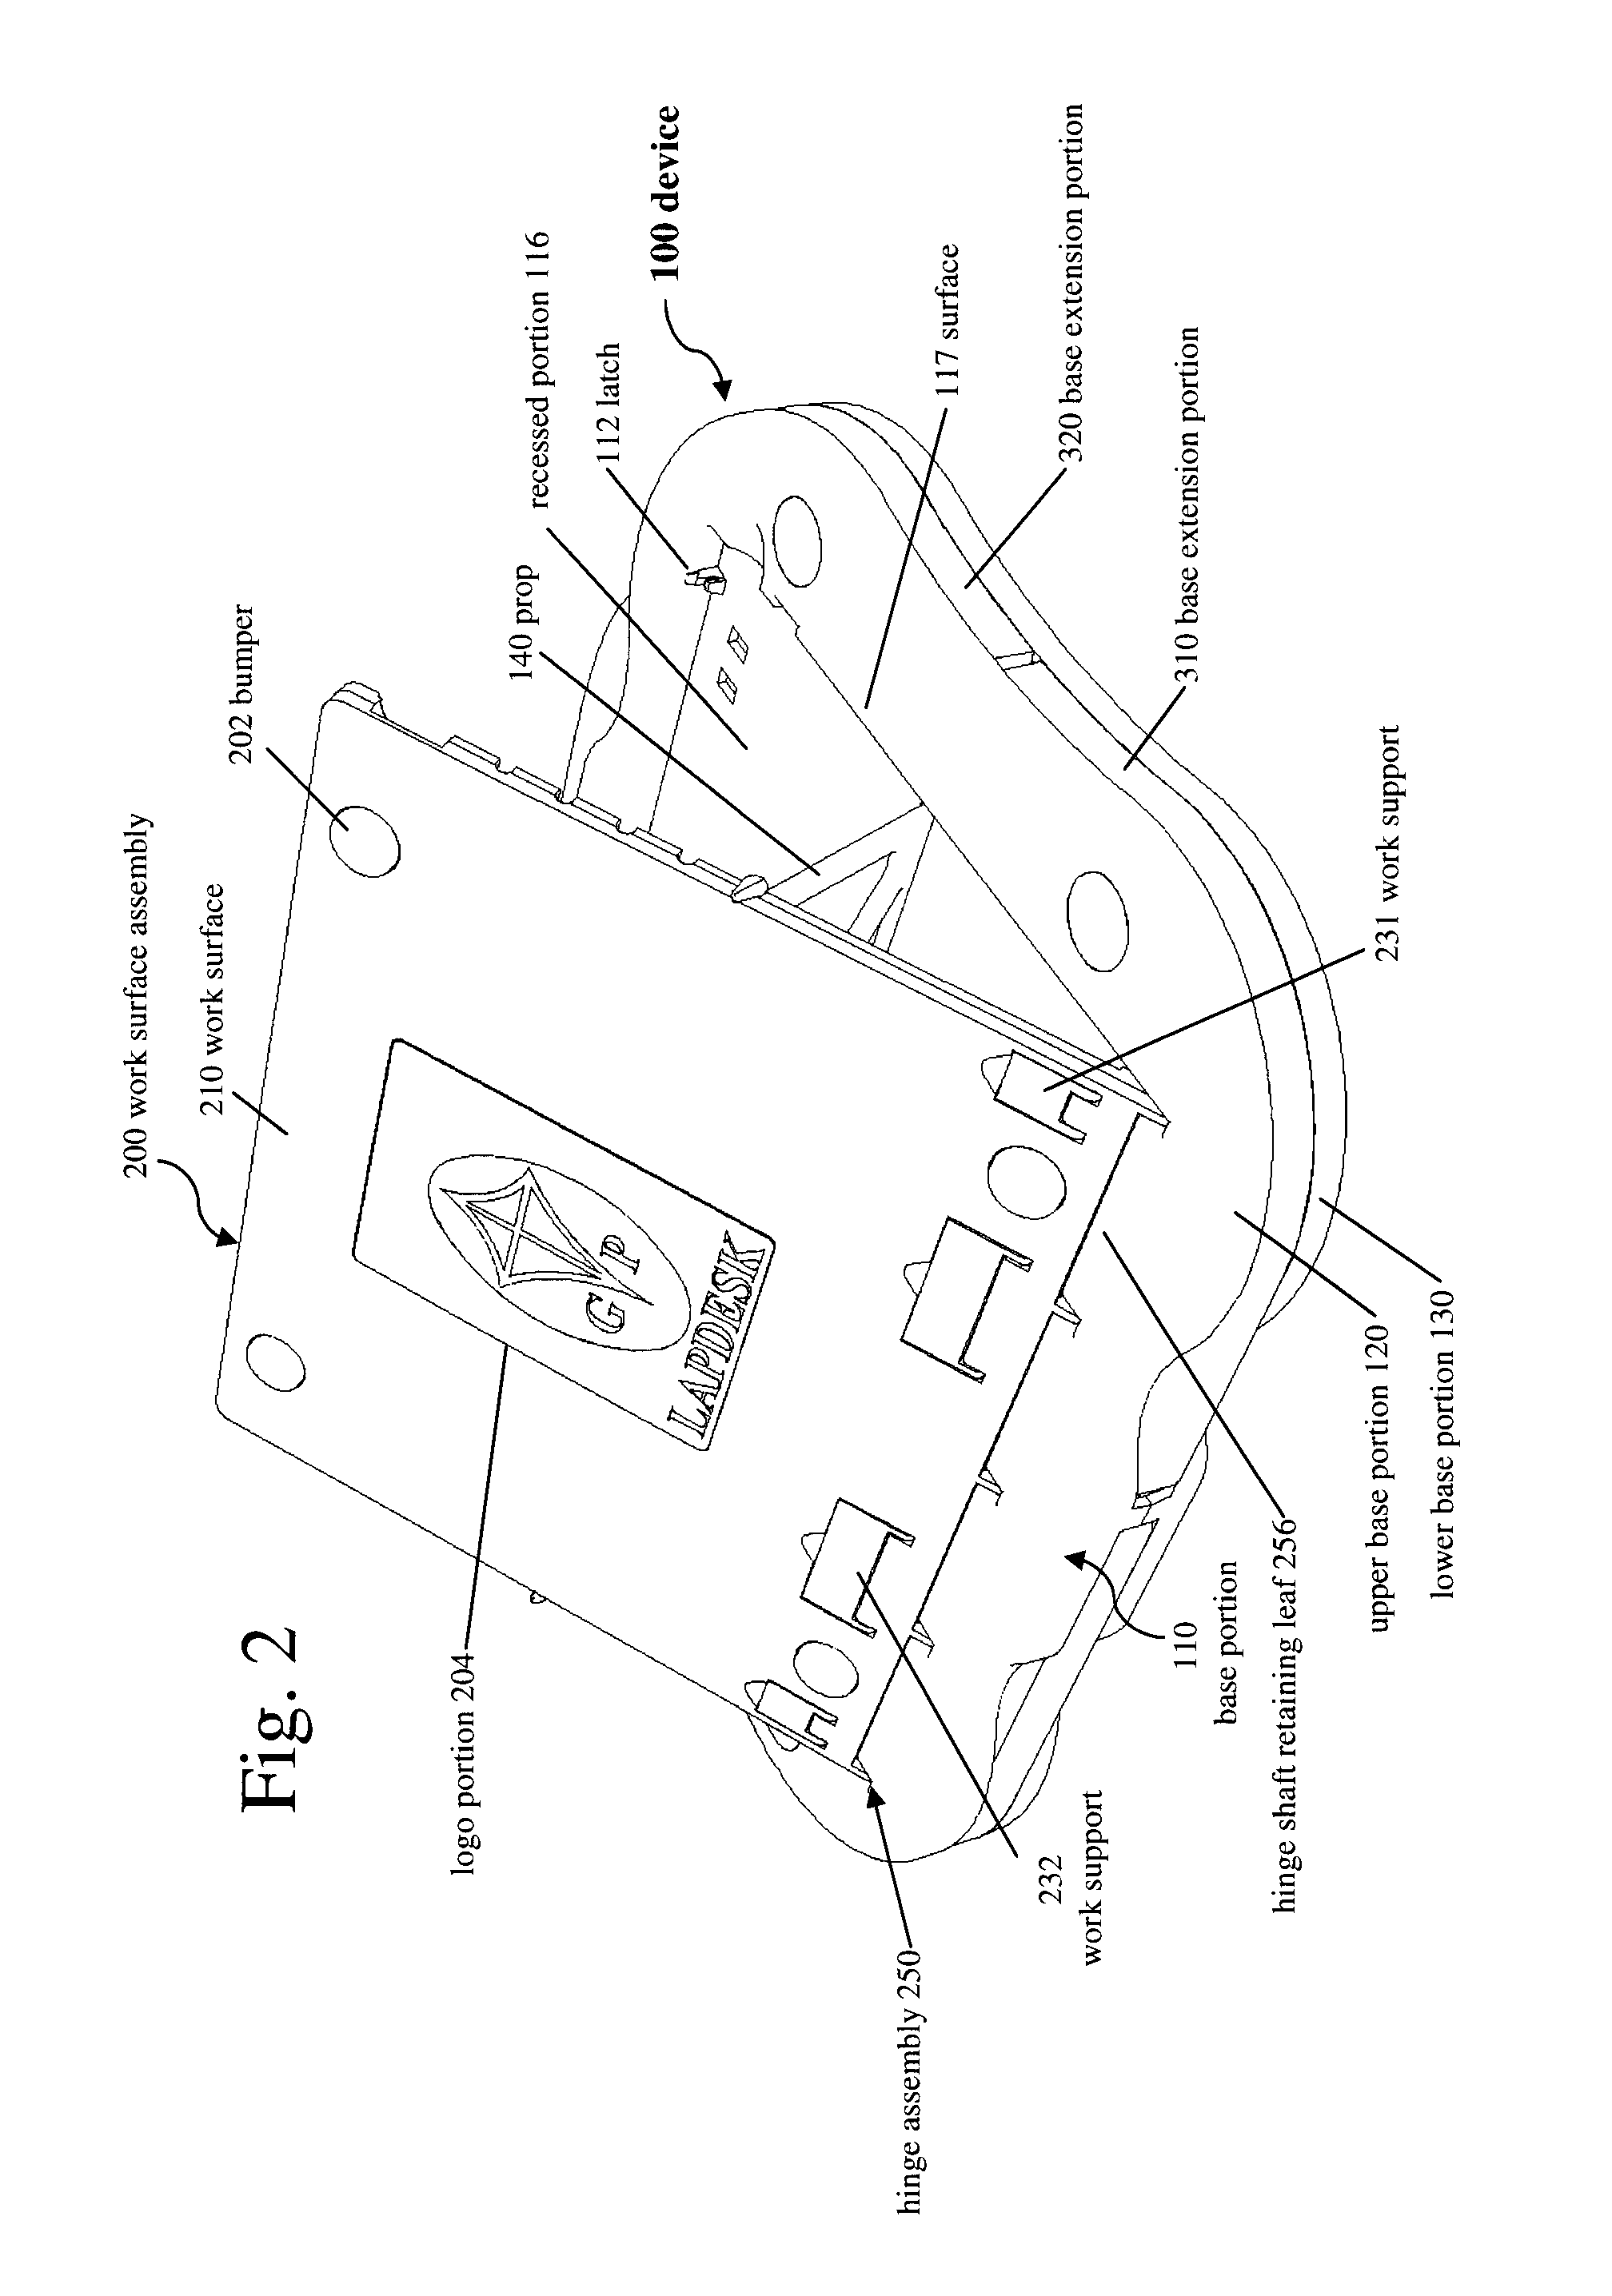 Devices For Providing A Workstation And Methods Of Making And Using The Same